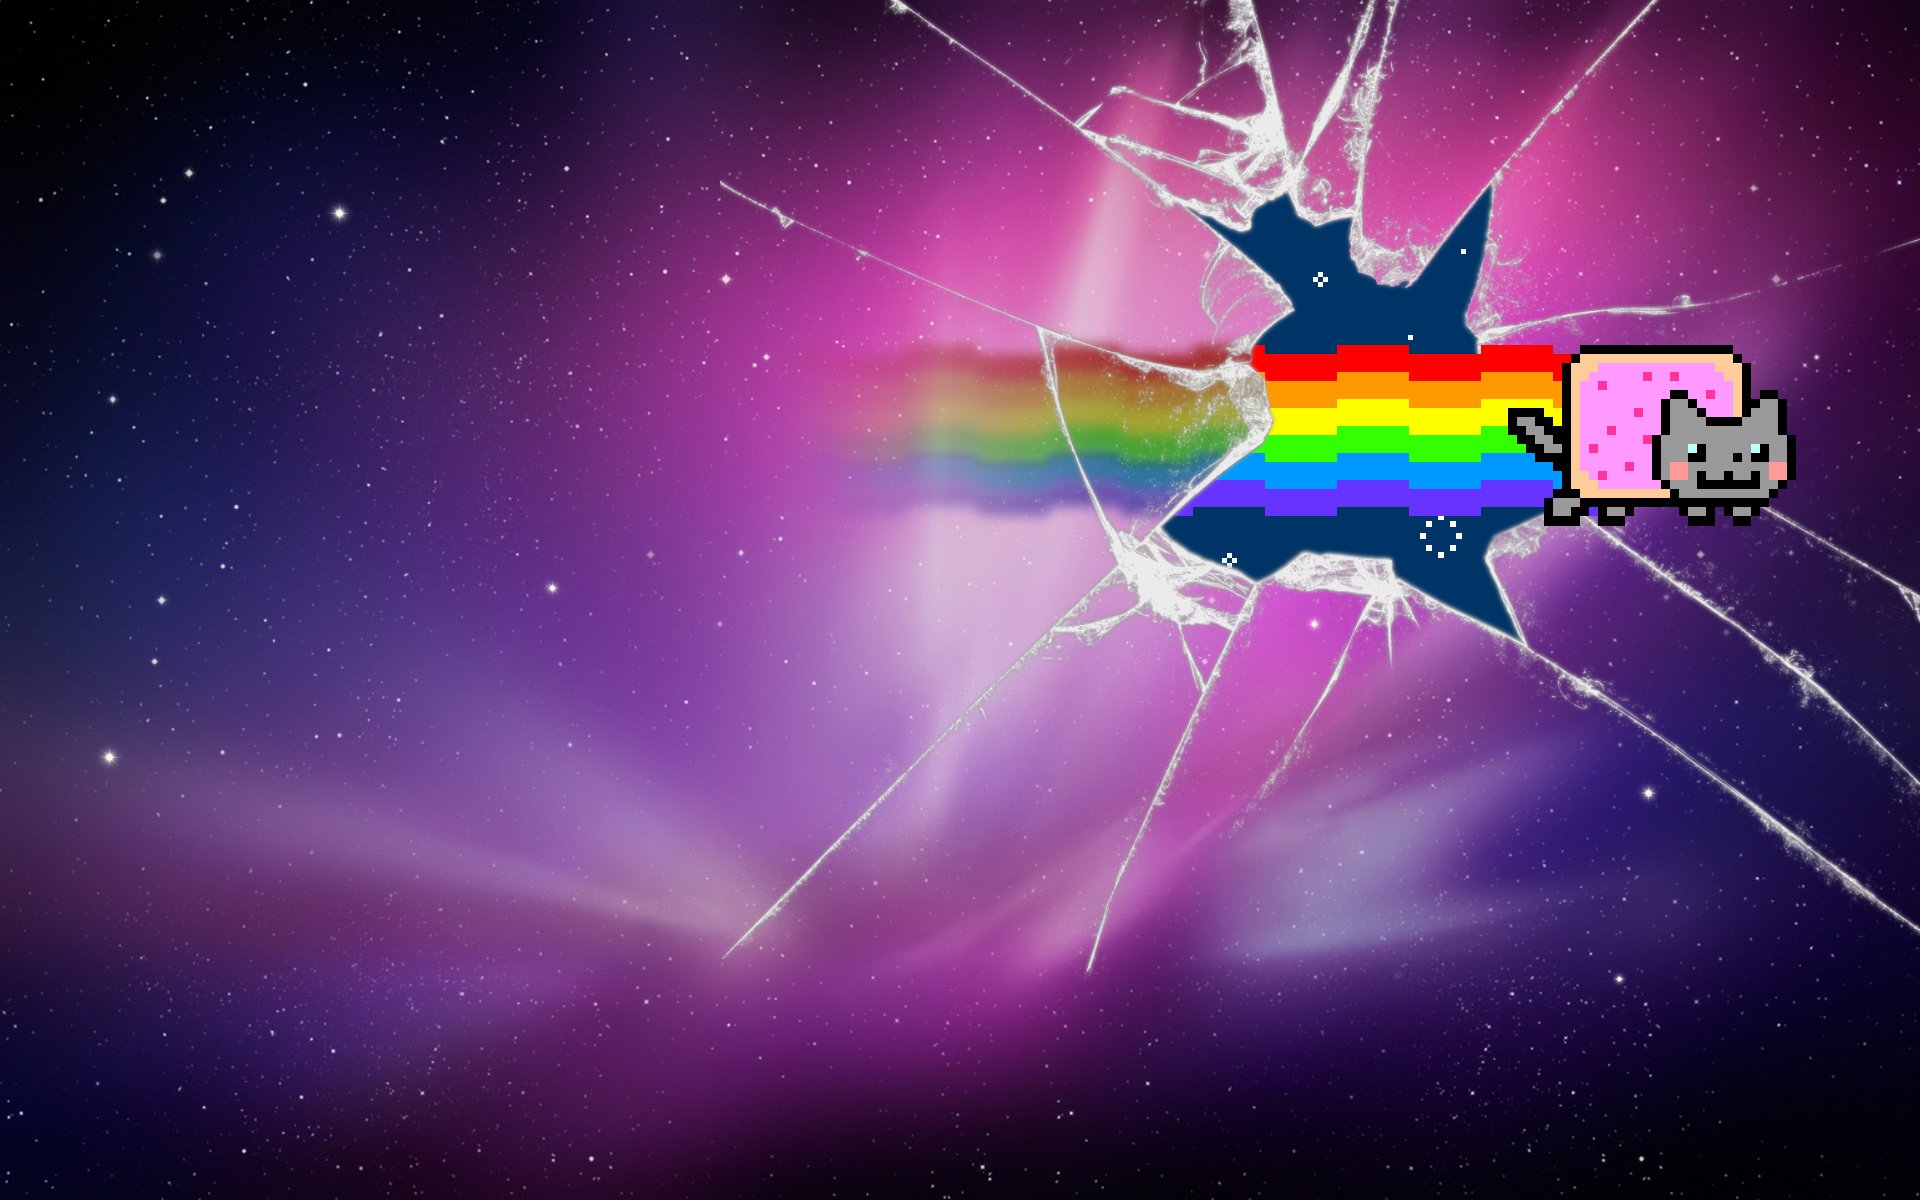 nyan cat wallpaper,graphic design,space,sky,atmosphere,graphics